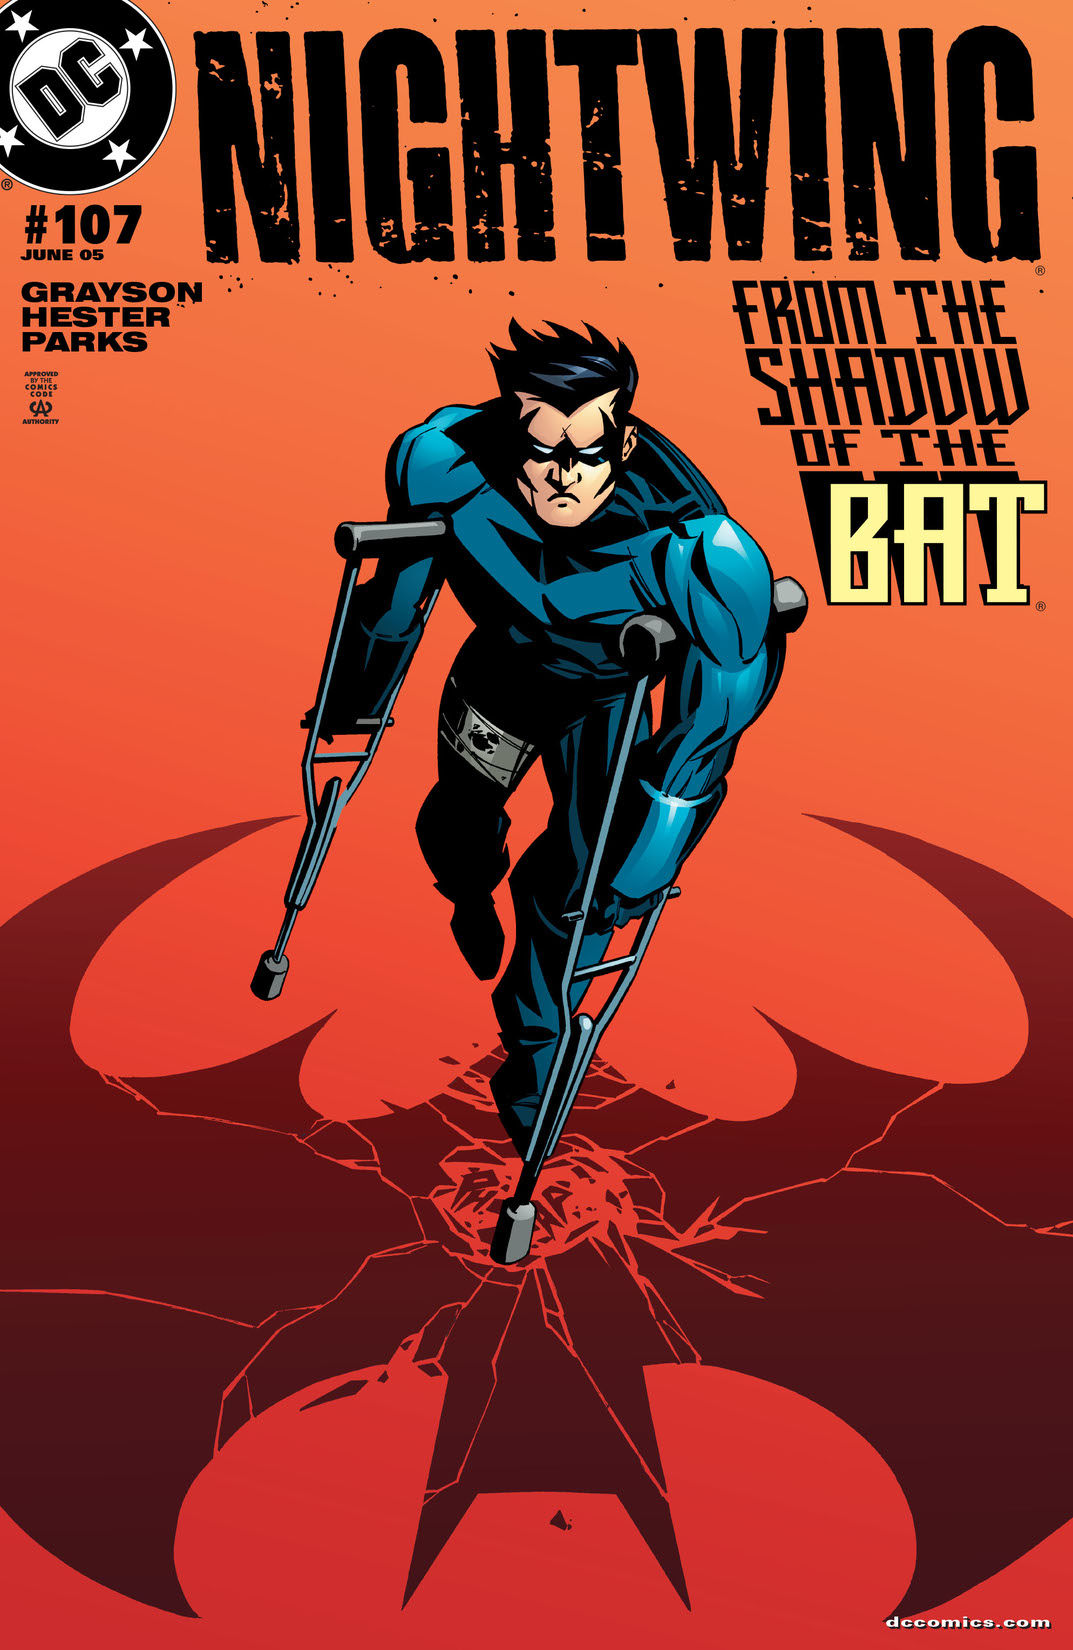 Nightwing (1996-) #107 preview images